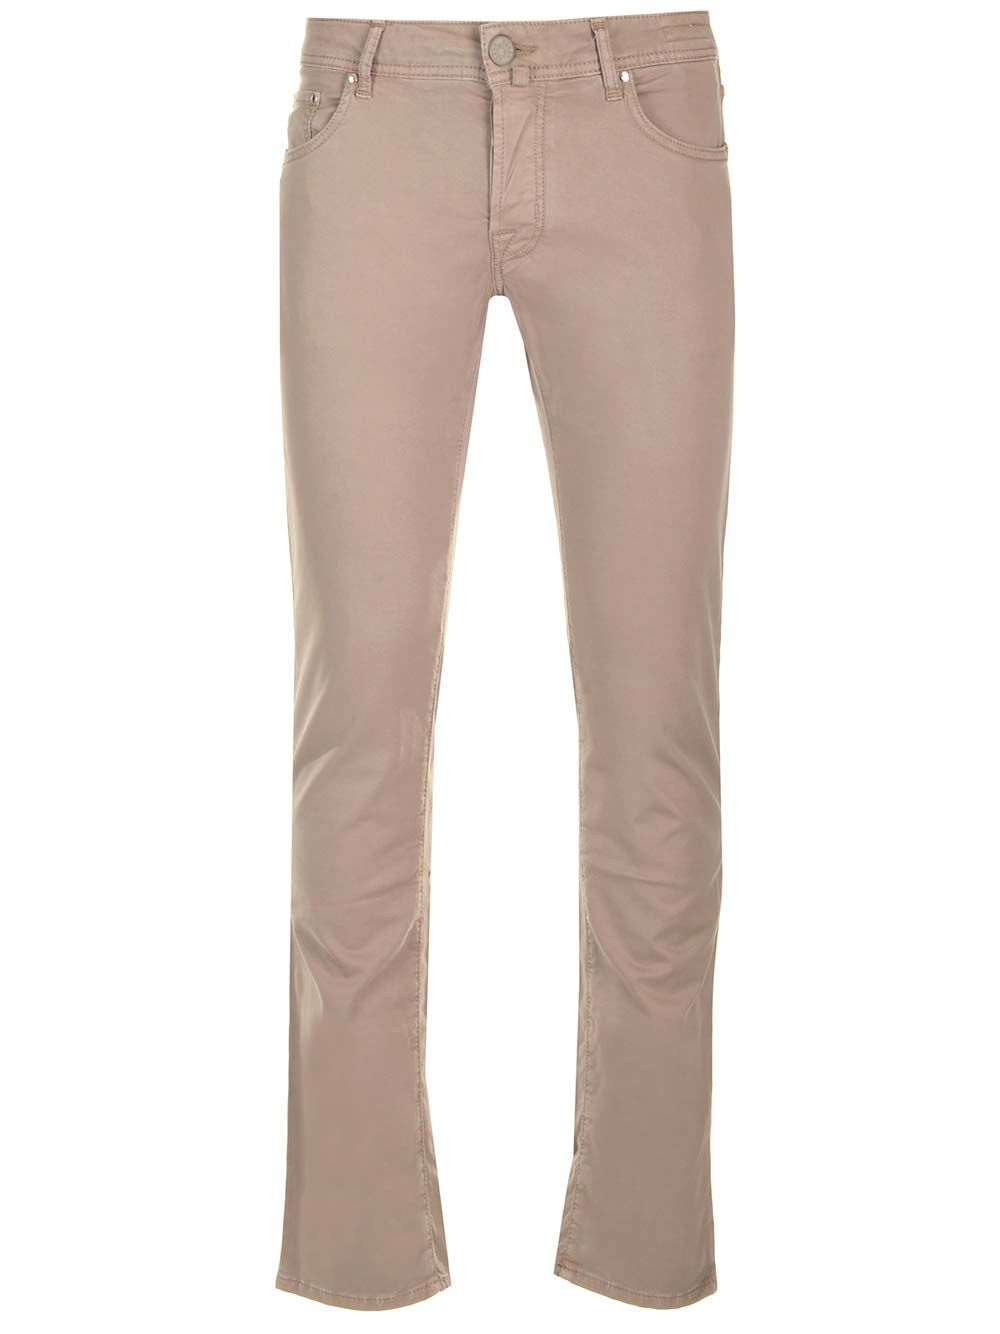 Cotton Twill nick Trousers